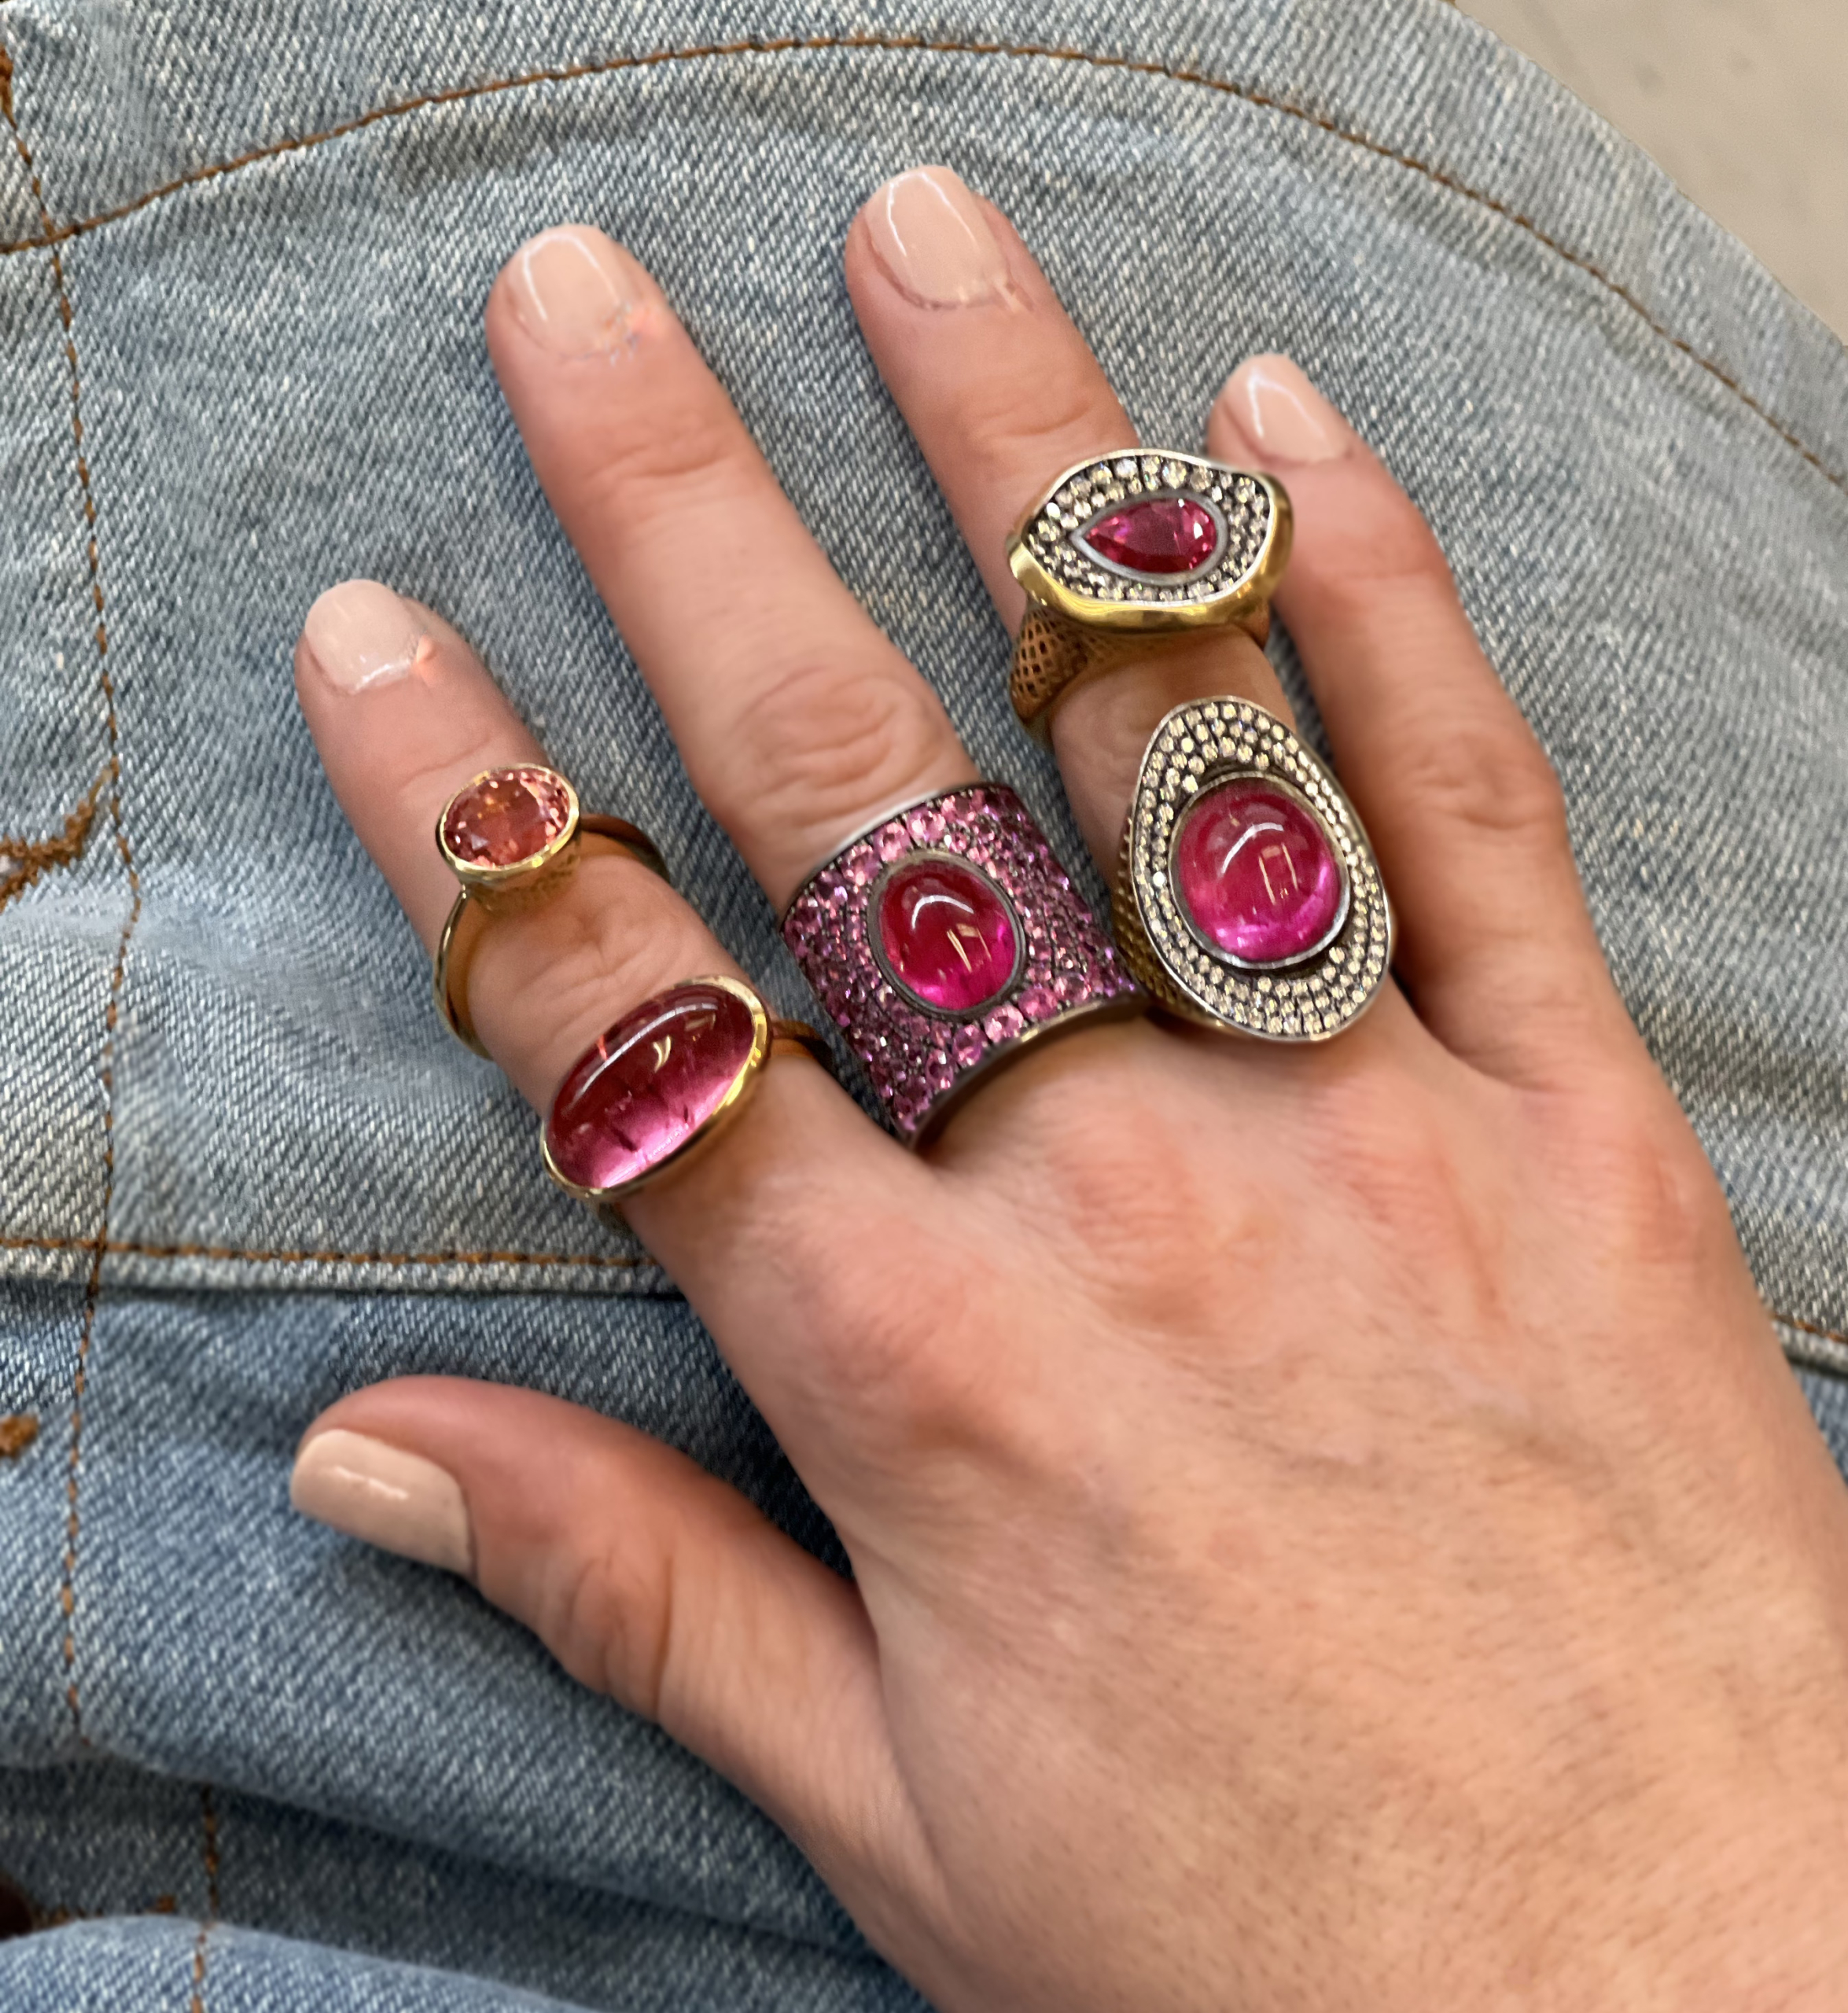 This is a group photo of pink tourmaline cocktail rings